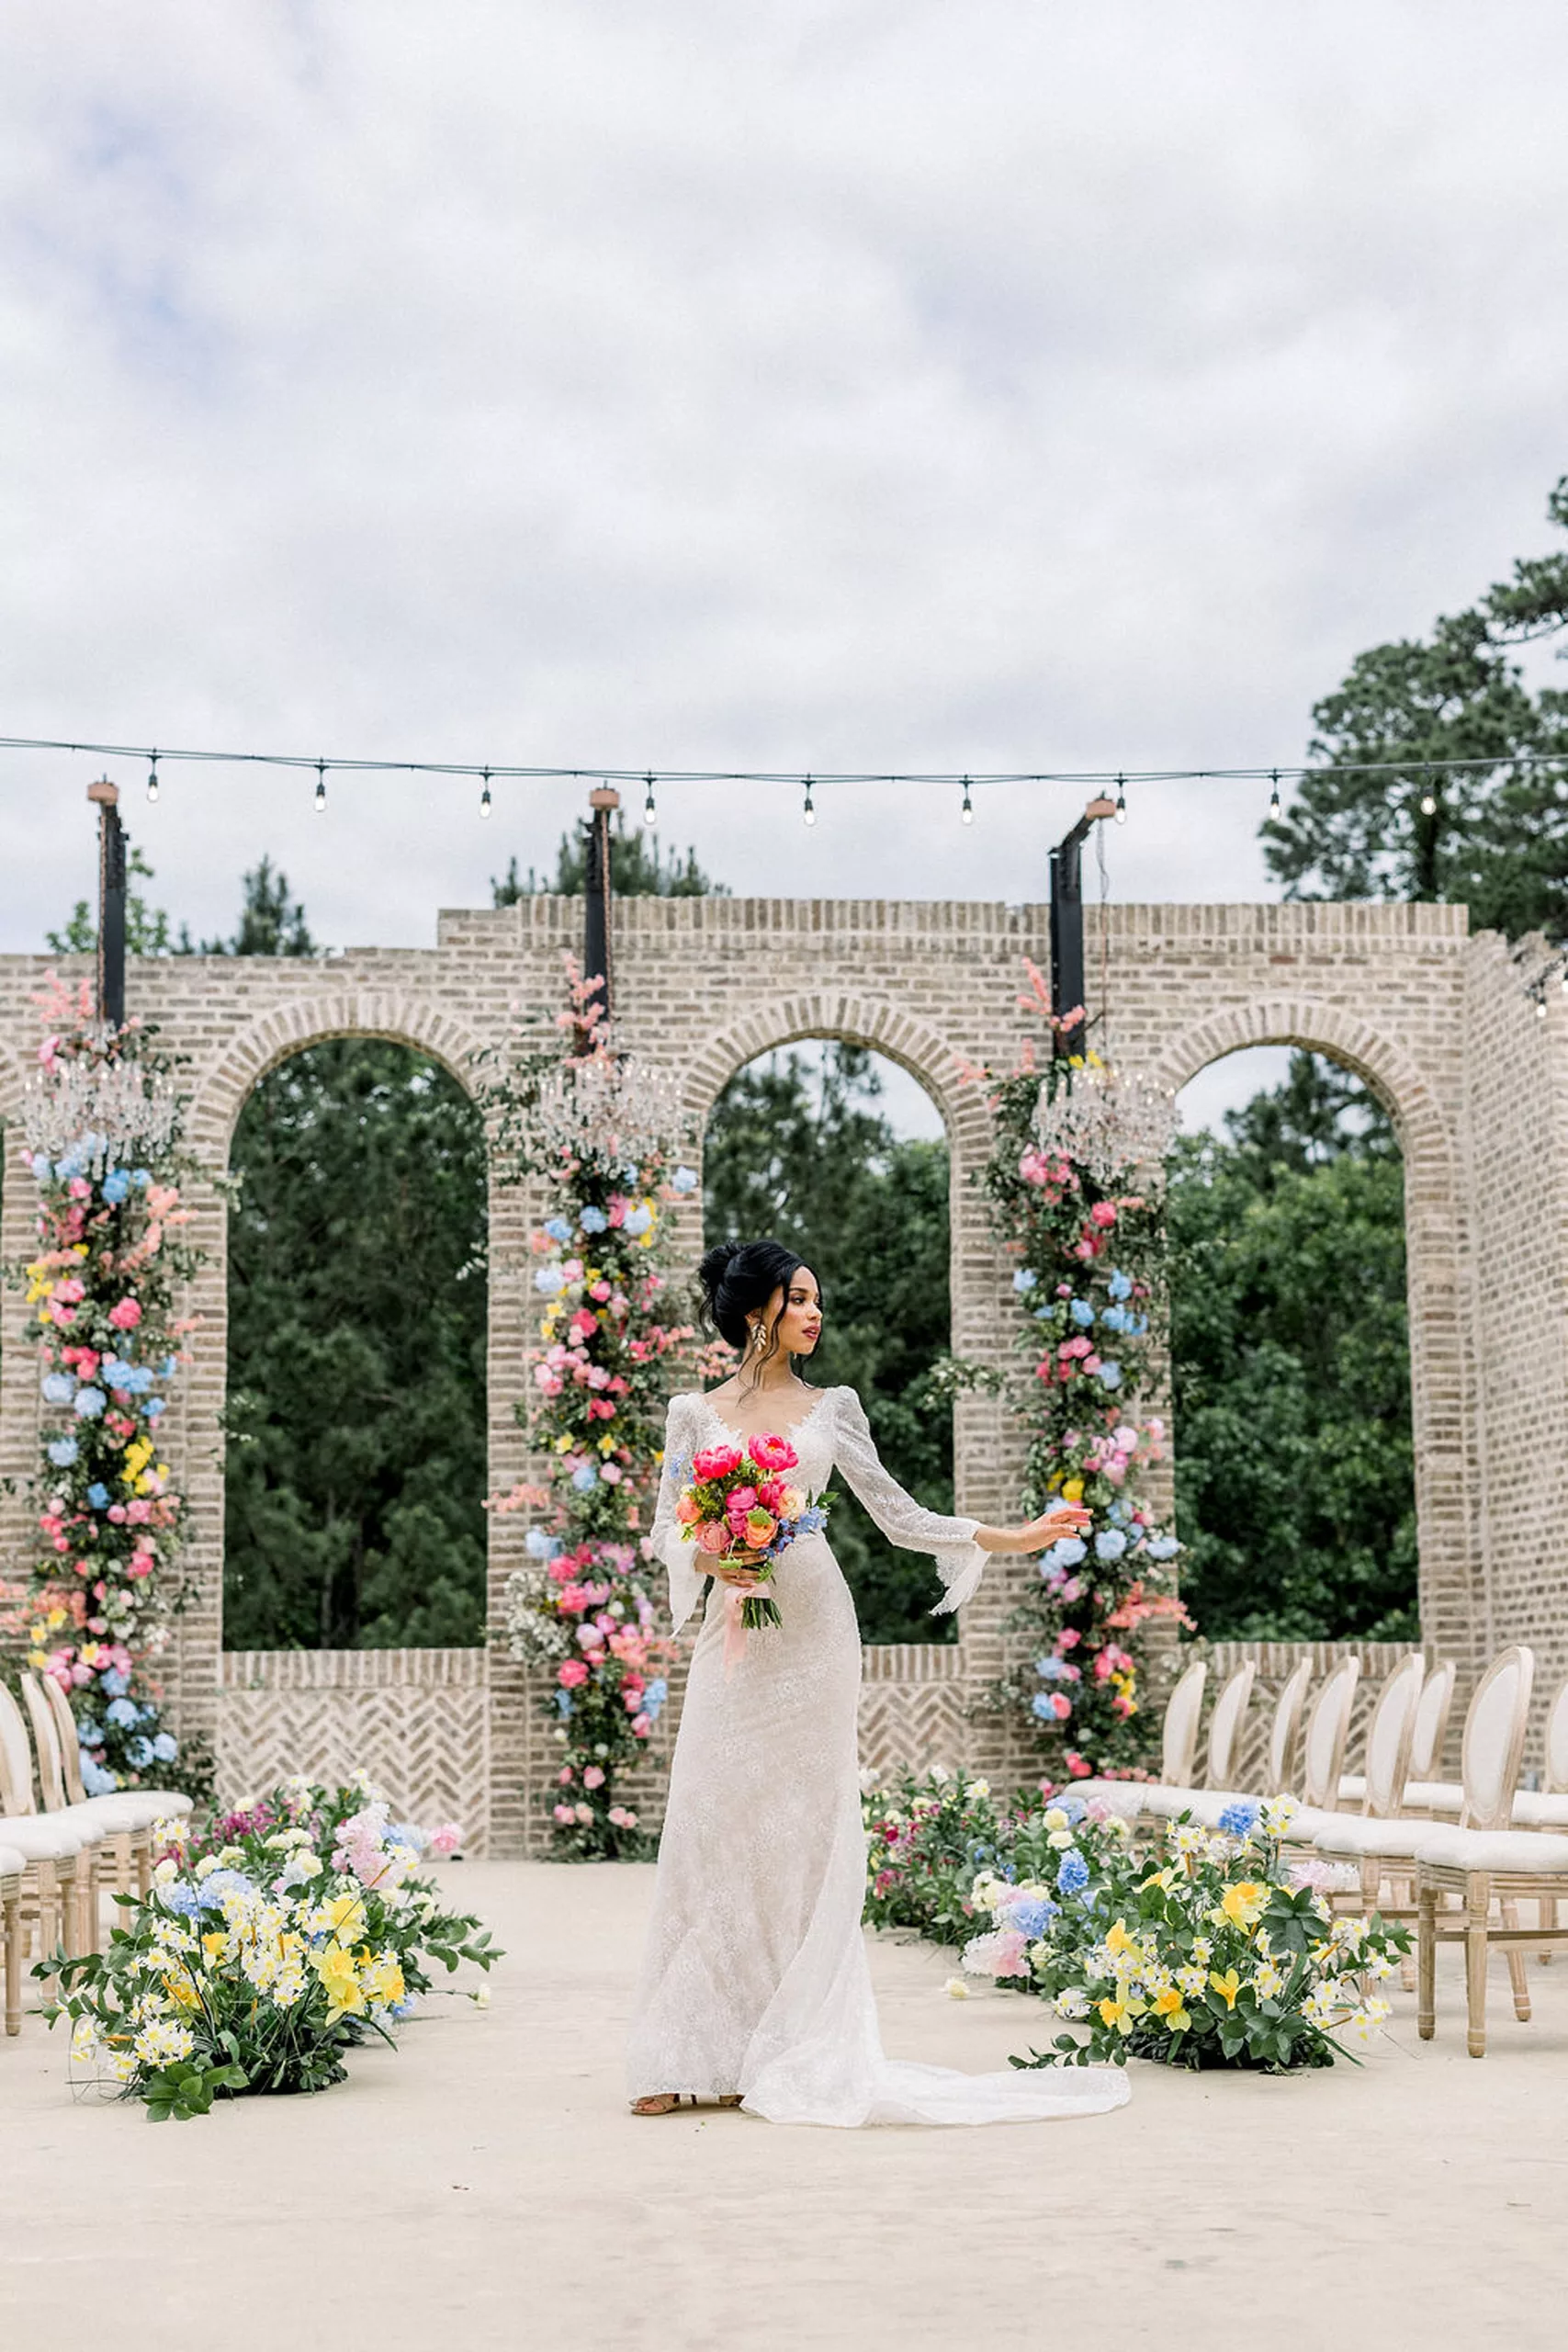 A bride in a white lace dress walks down the empty aisle of her outdoor iron manor wedding ceremony location with tall brick arches